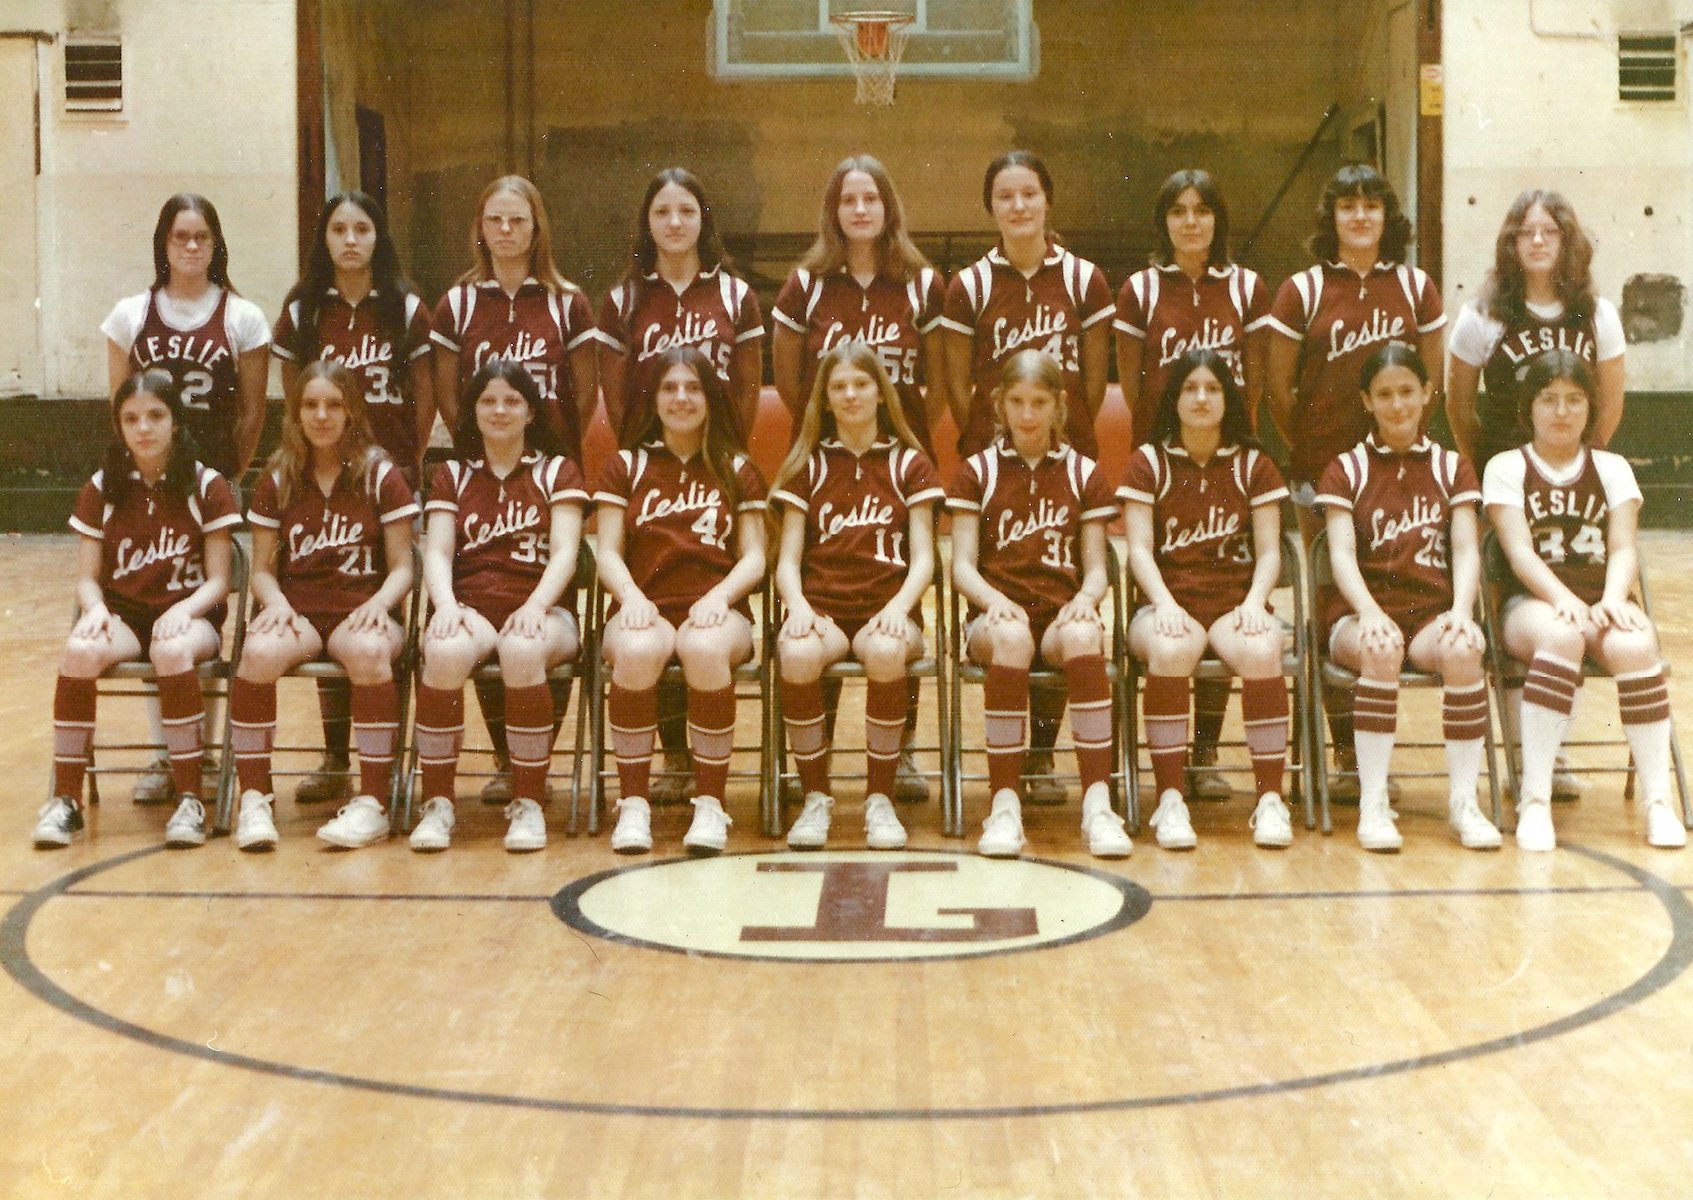 Kim Stacy (age 17 and placed fifth from the left in the back row) as captain of her high school basketball team, Leslie County, KY, 1974. 